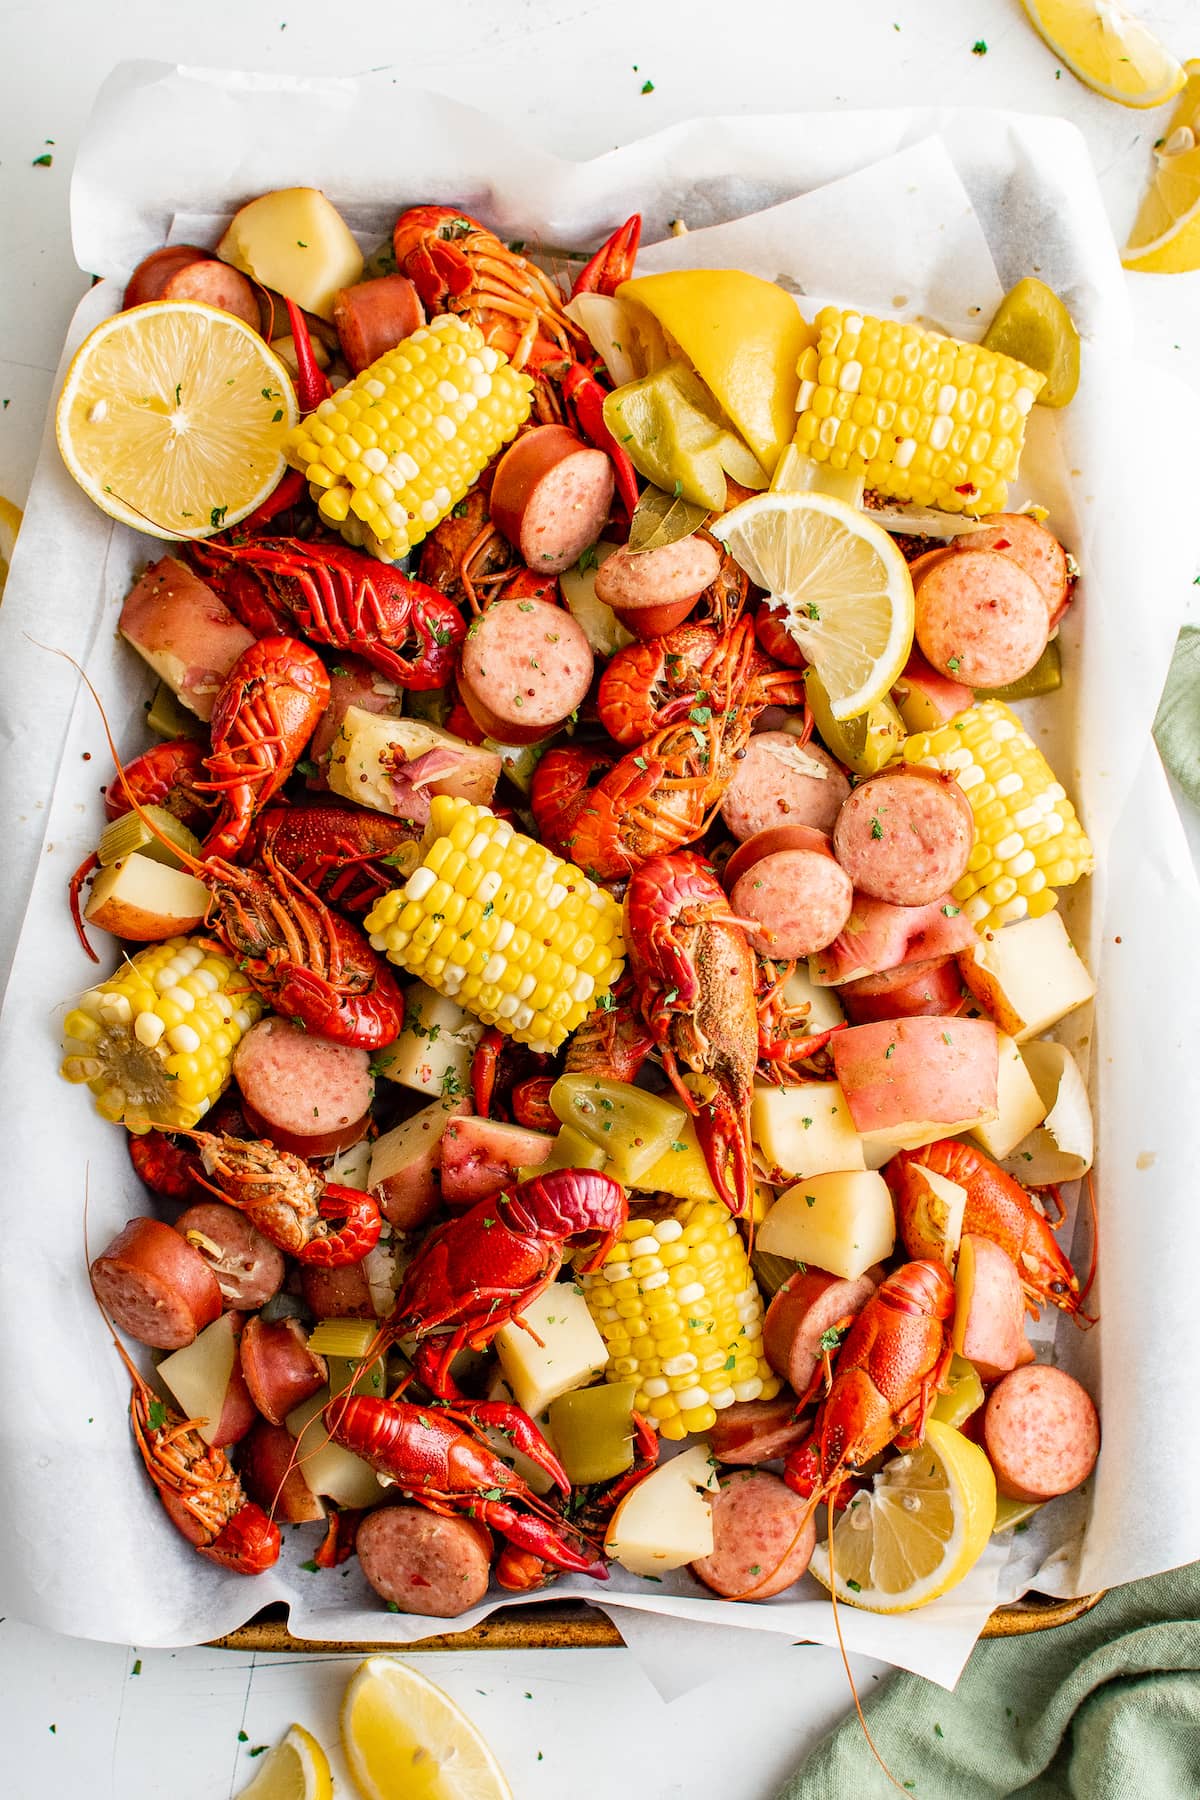 A sheet pan filled with boiled crawfish, corn, potatoes, and lemon wedges.